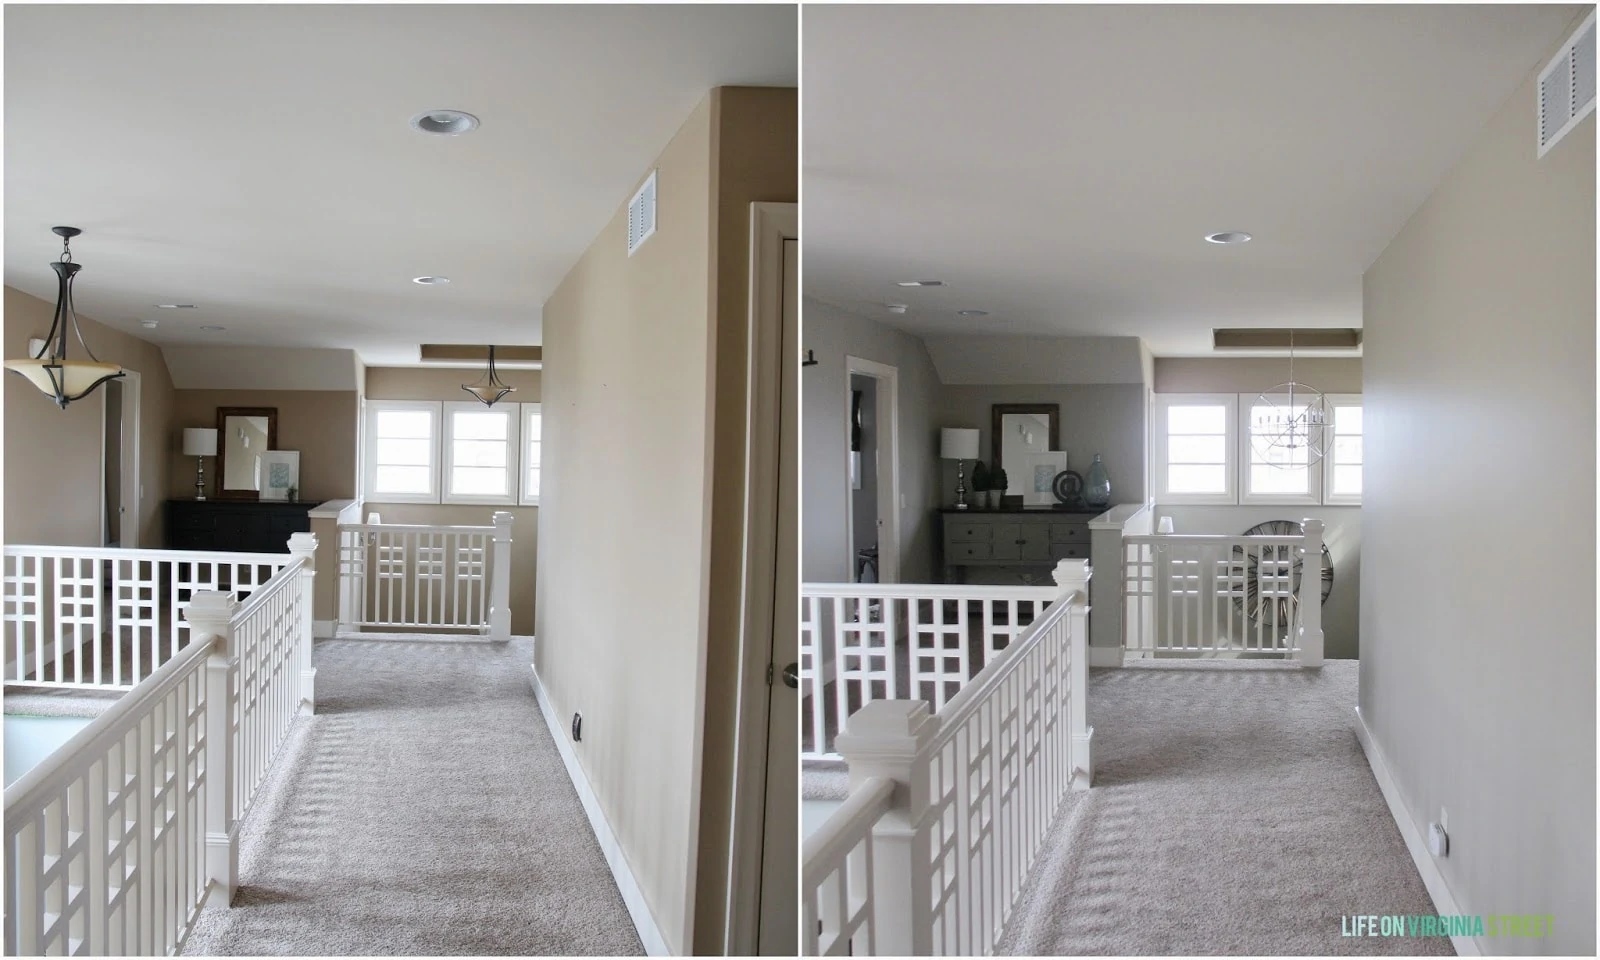 Left - before, and right - after a coat of Behr Castle path paint. Love how much lighter the space looks already.